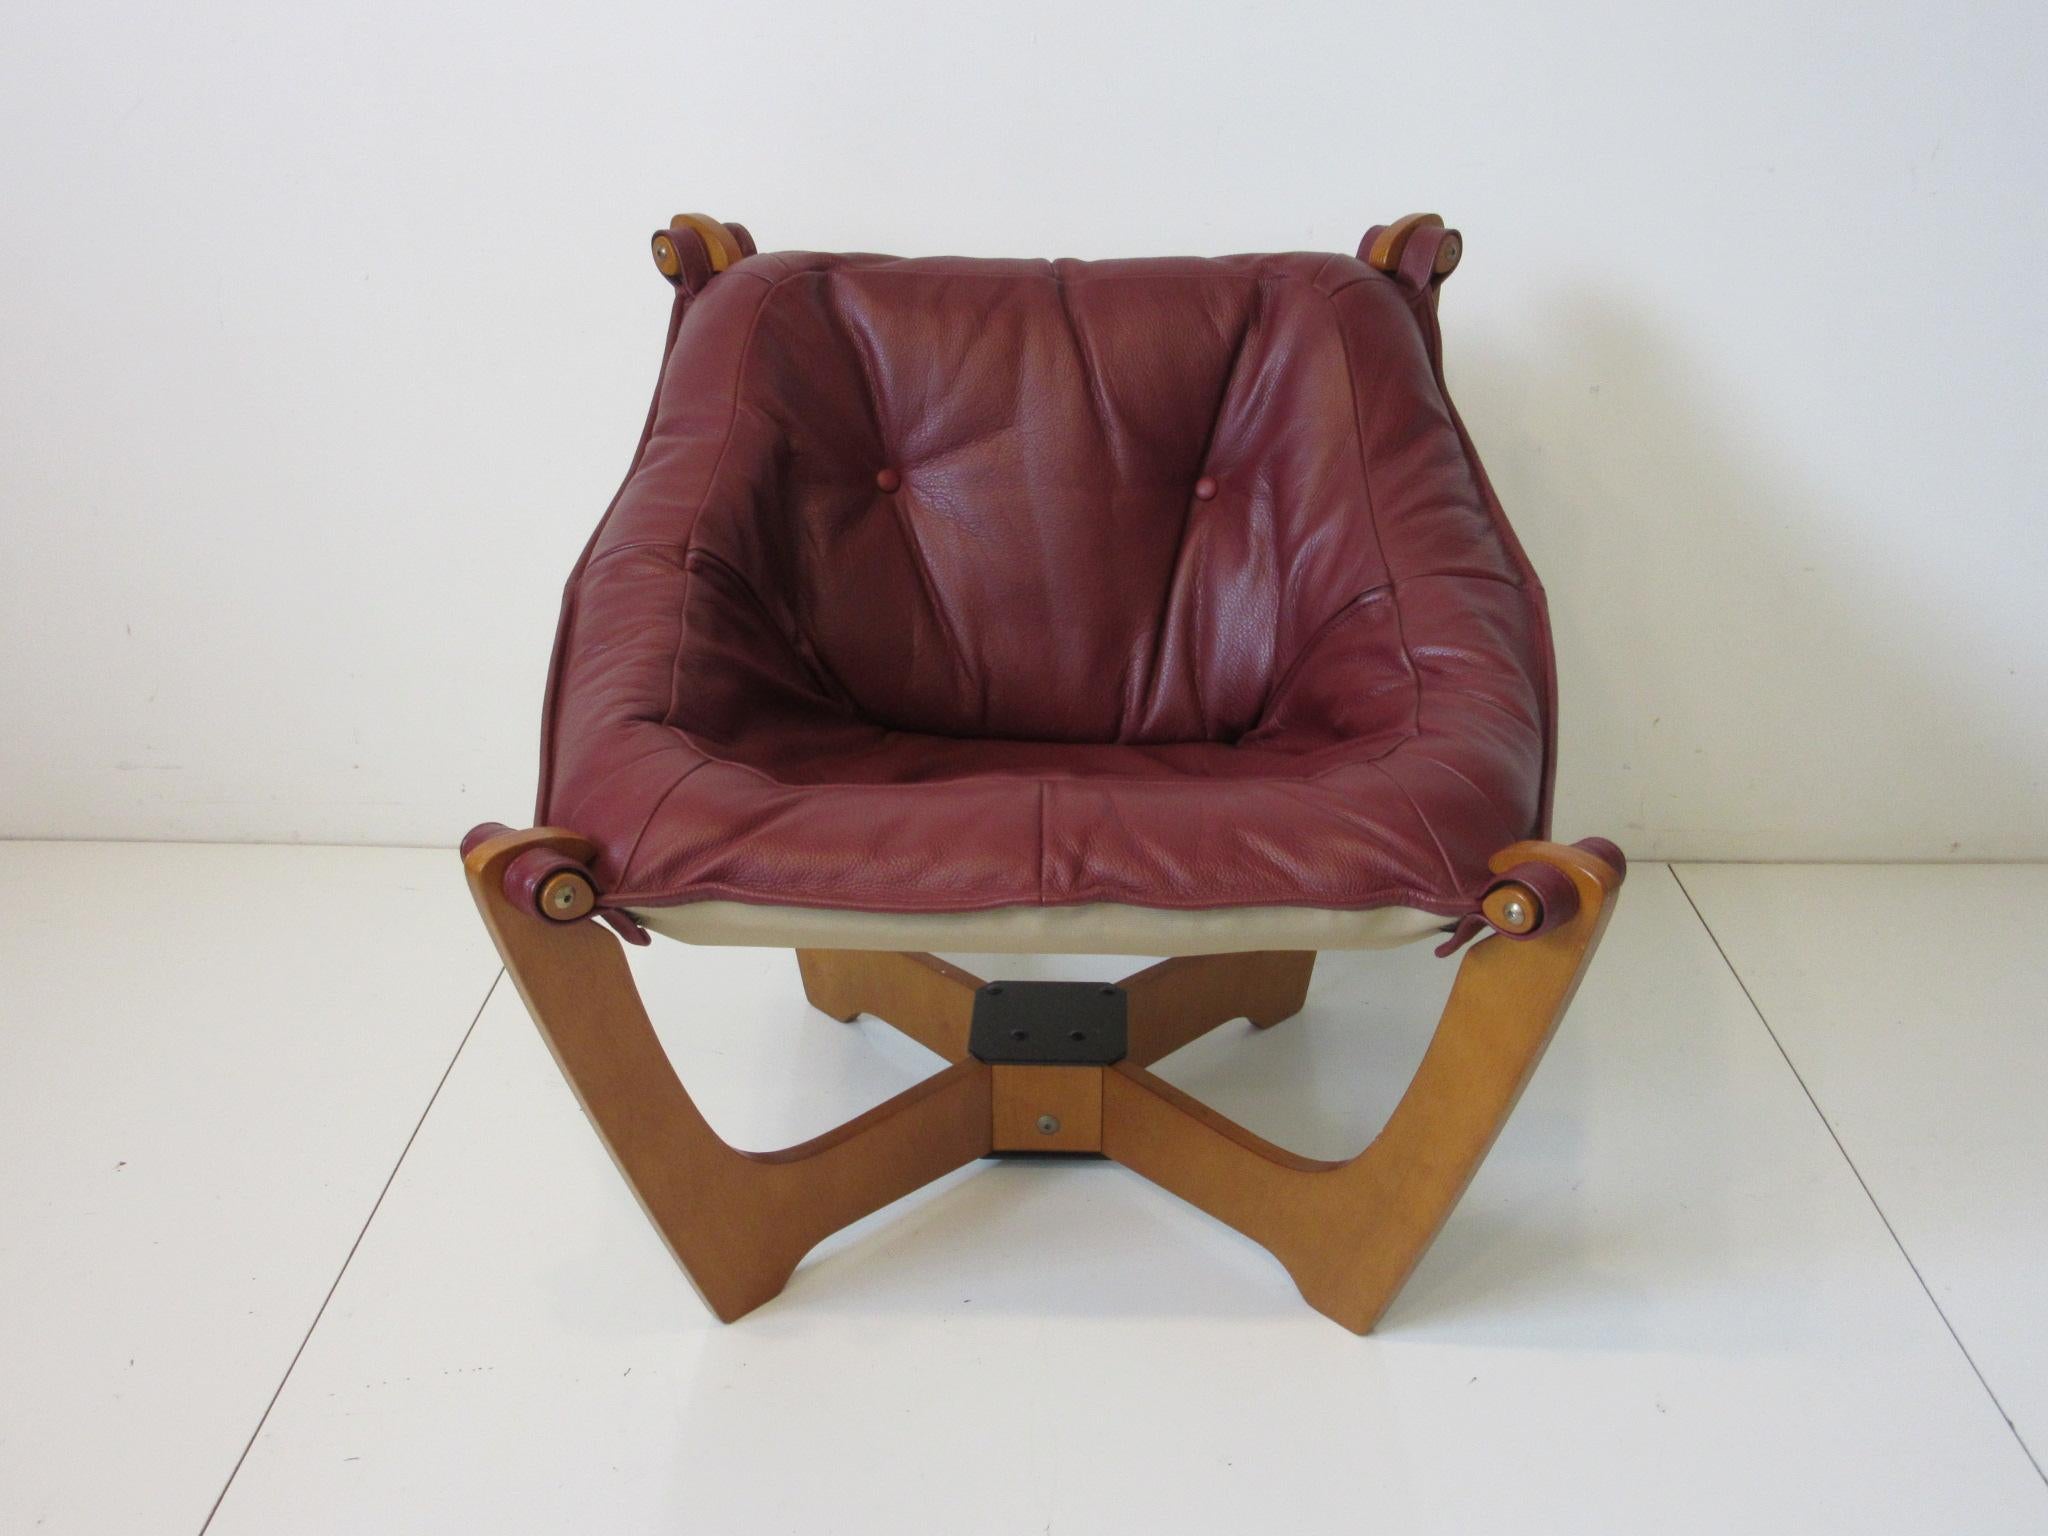 A lounge chair in a deep rich burgundy colored leather with X crossed wooden base which holds each corner of the seat in a sling style arrangement. The corners are securely held together with brass bolts and wood, well-crafted and super comfortable